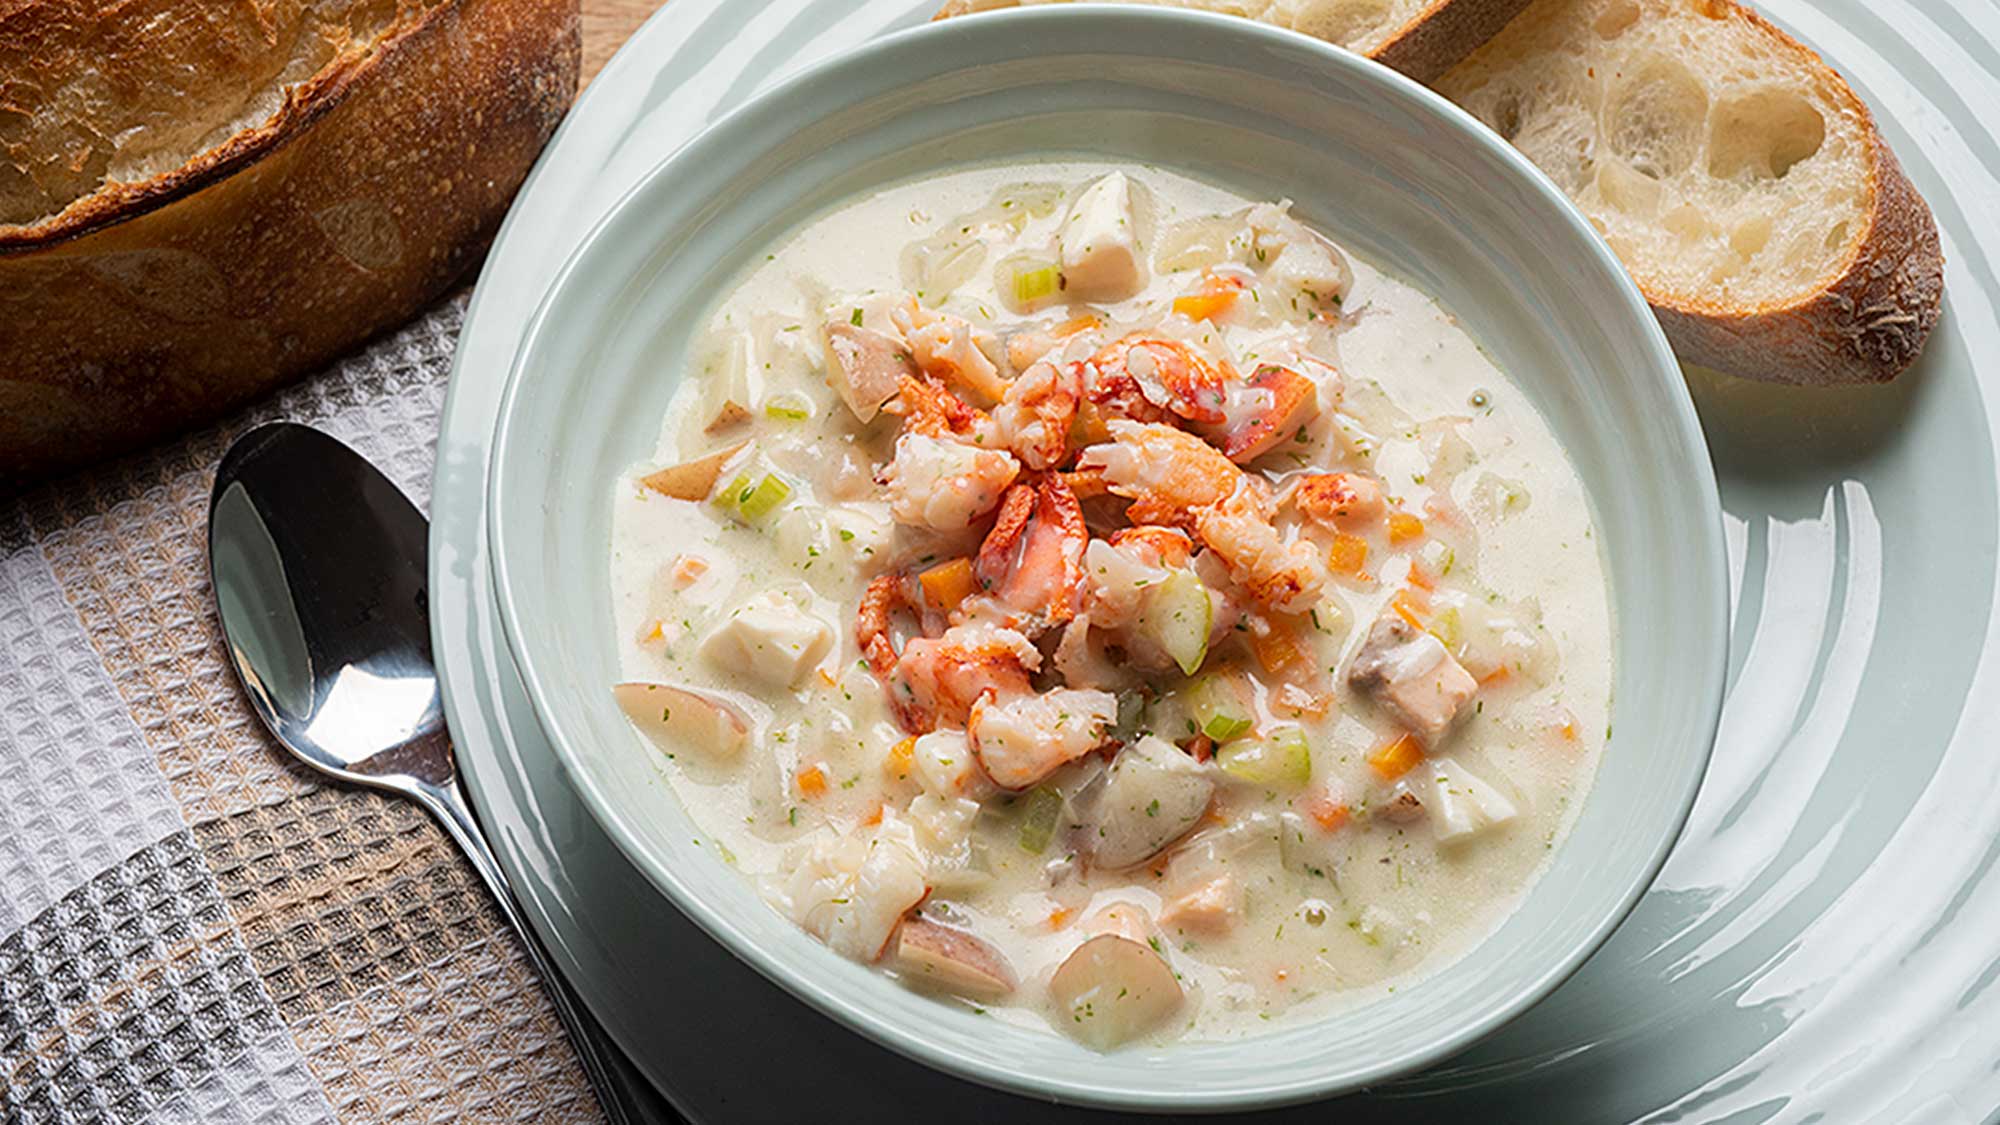 A bowl of seafood chowder with some baguette slices